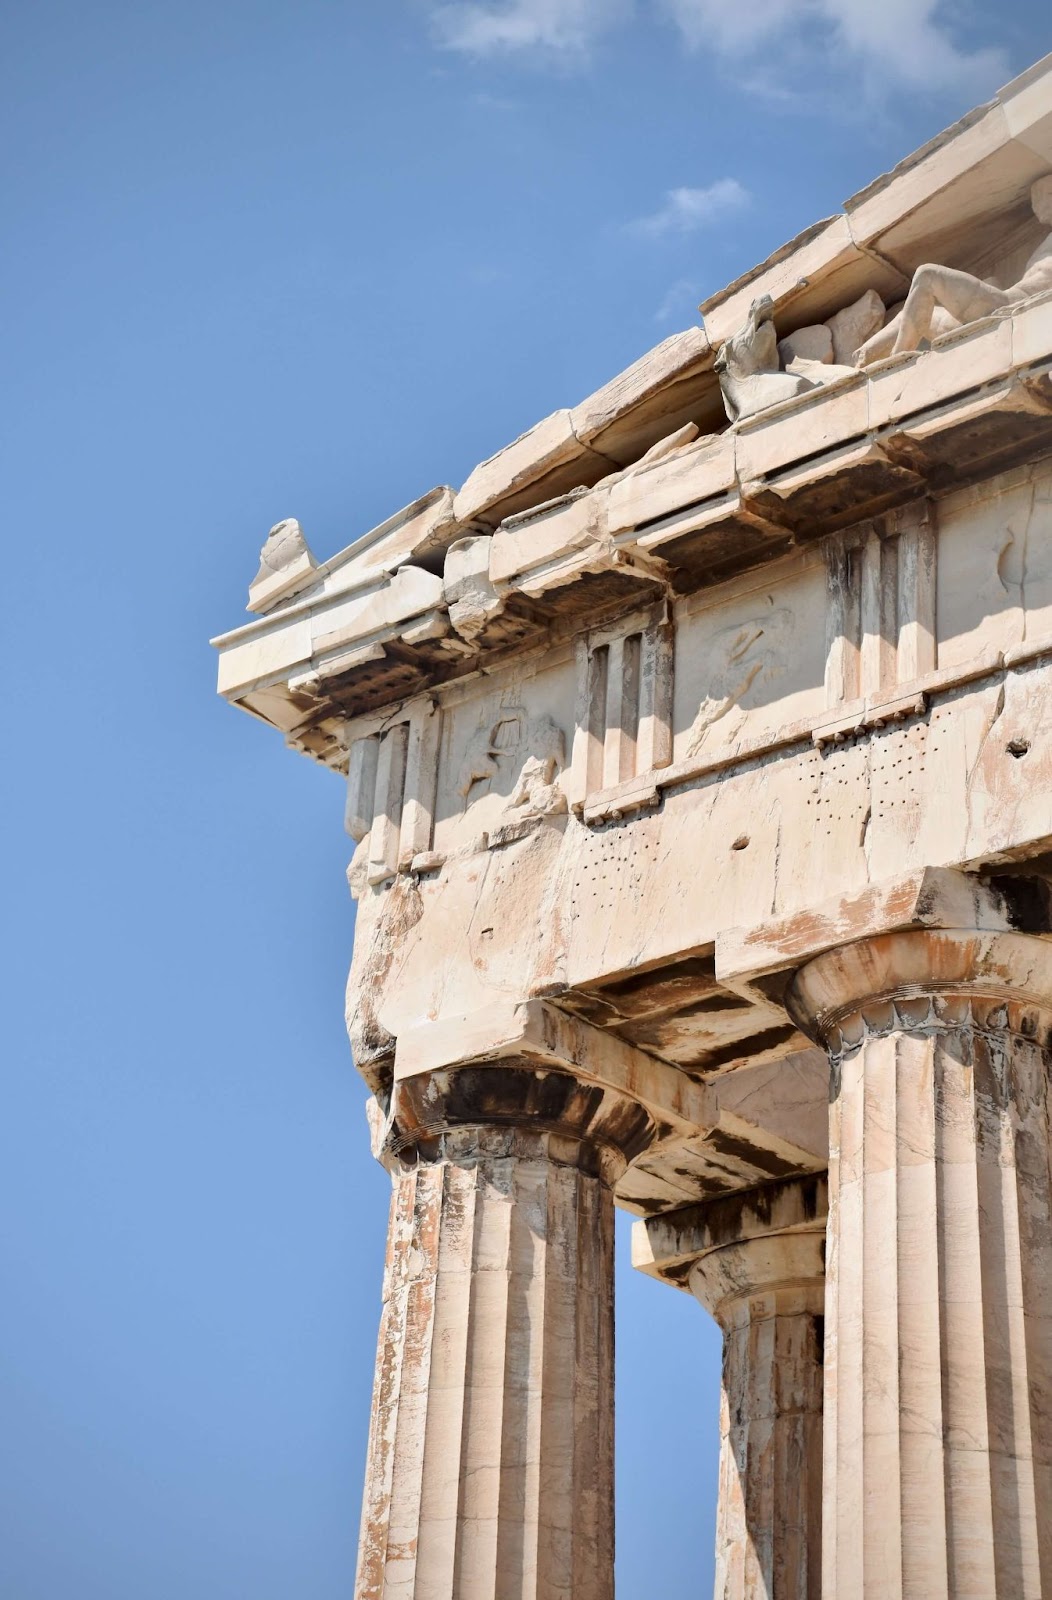 1 day in Athens, Parthenon, symbol of democracy and ancient Greece, Athens, Greece